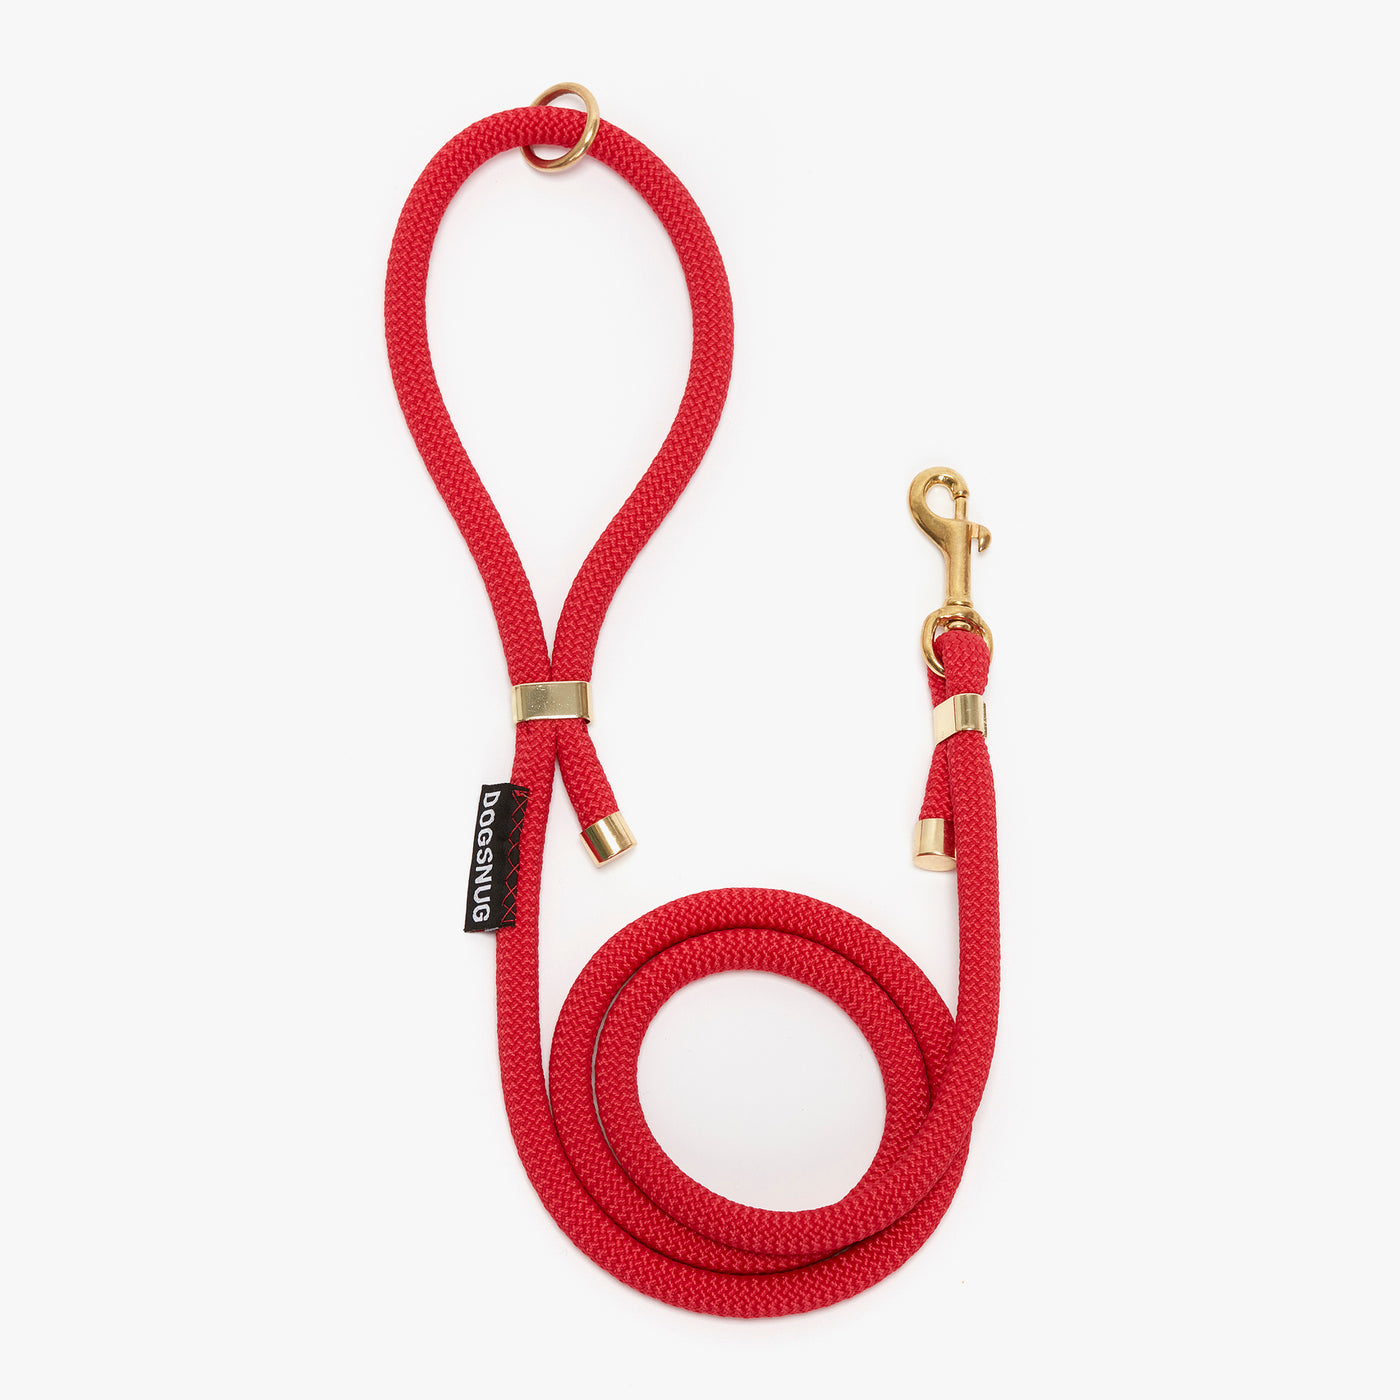 Rope dog lead in red, standard length